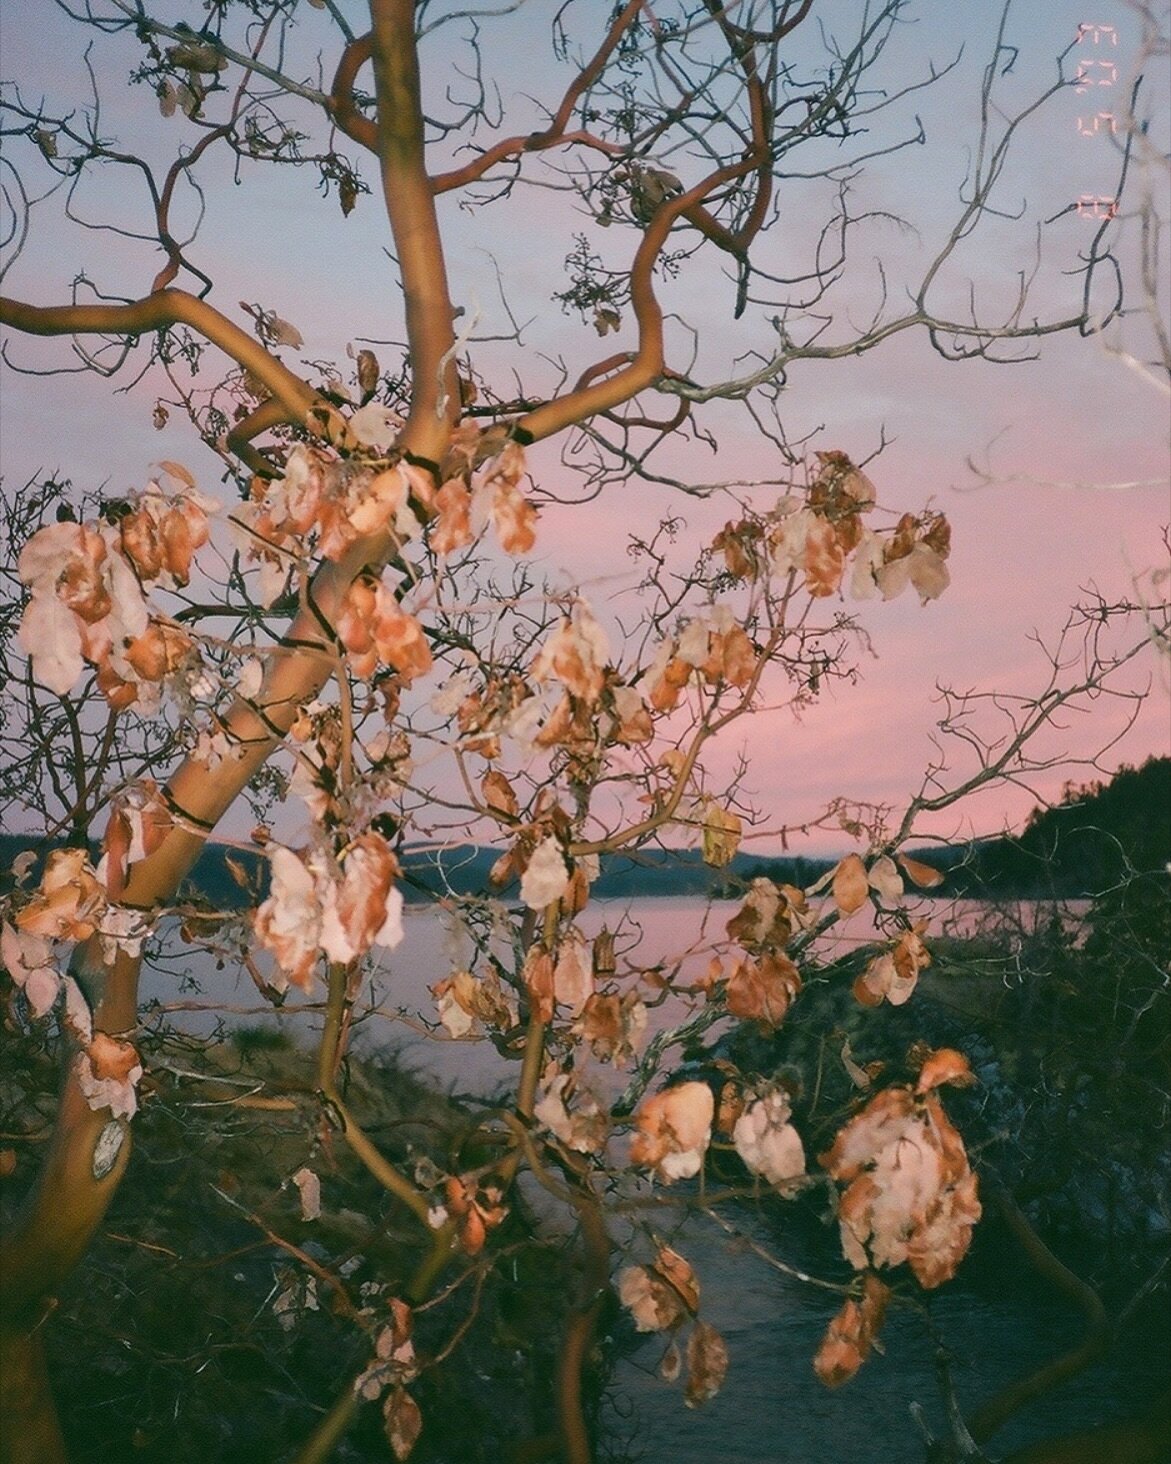 Arbutus Tree vs Sunset
Summer 2023 in Desolation Sound 

I finally took in a few rolls of ancient film ☺️